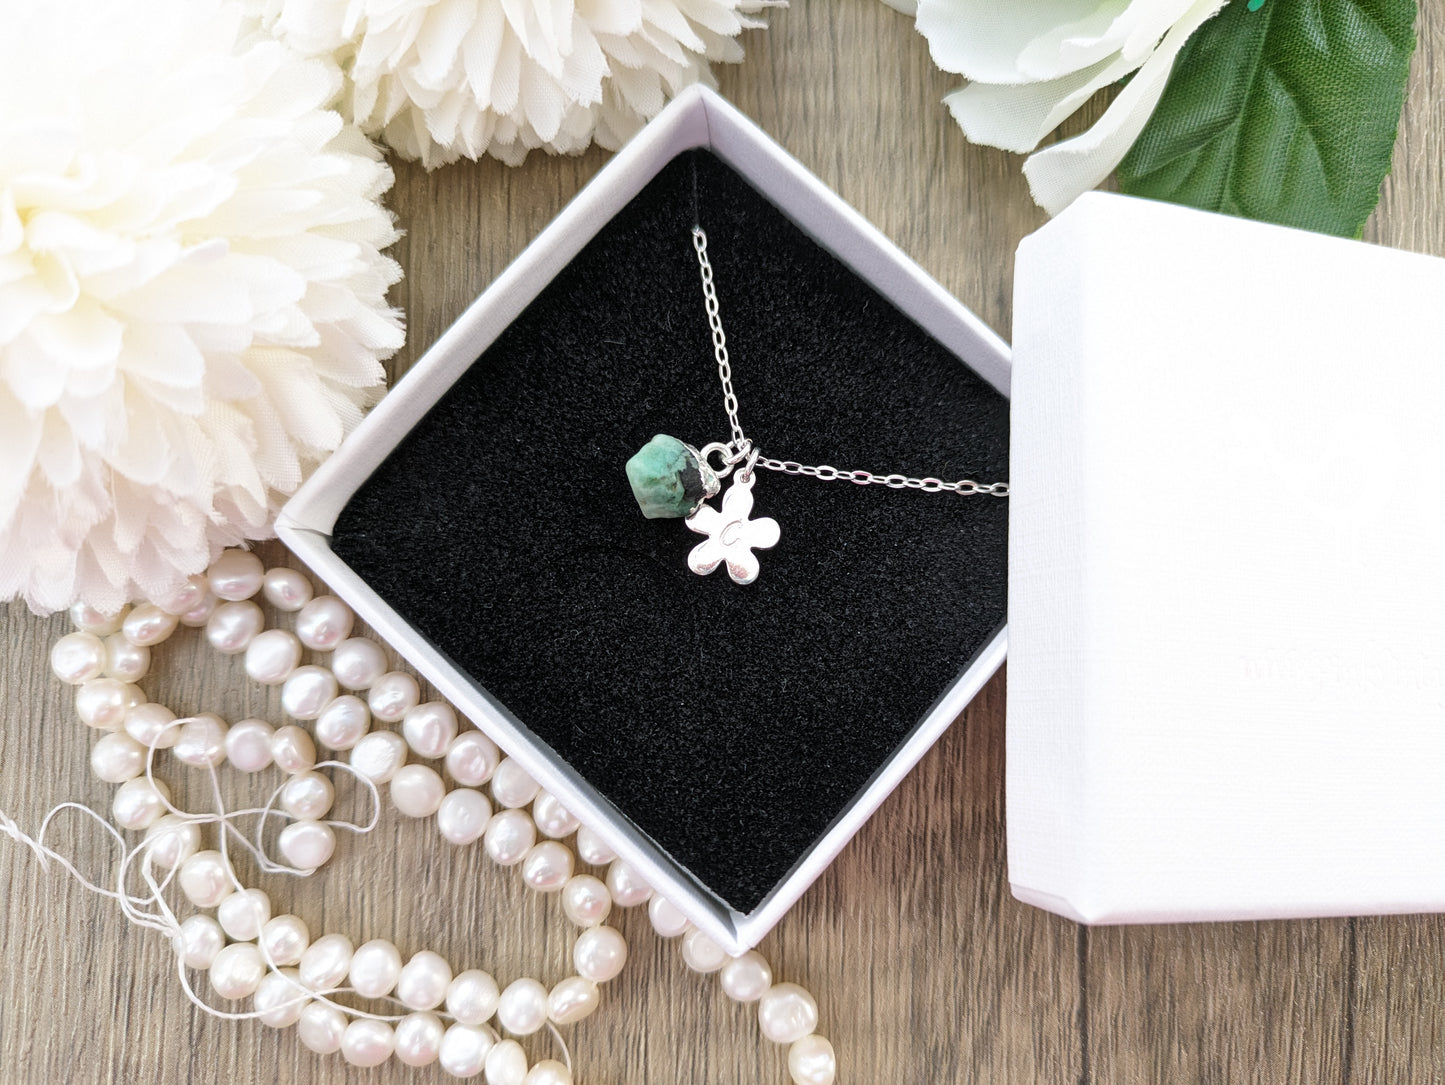 Personalised emerald necklace in silver.